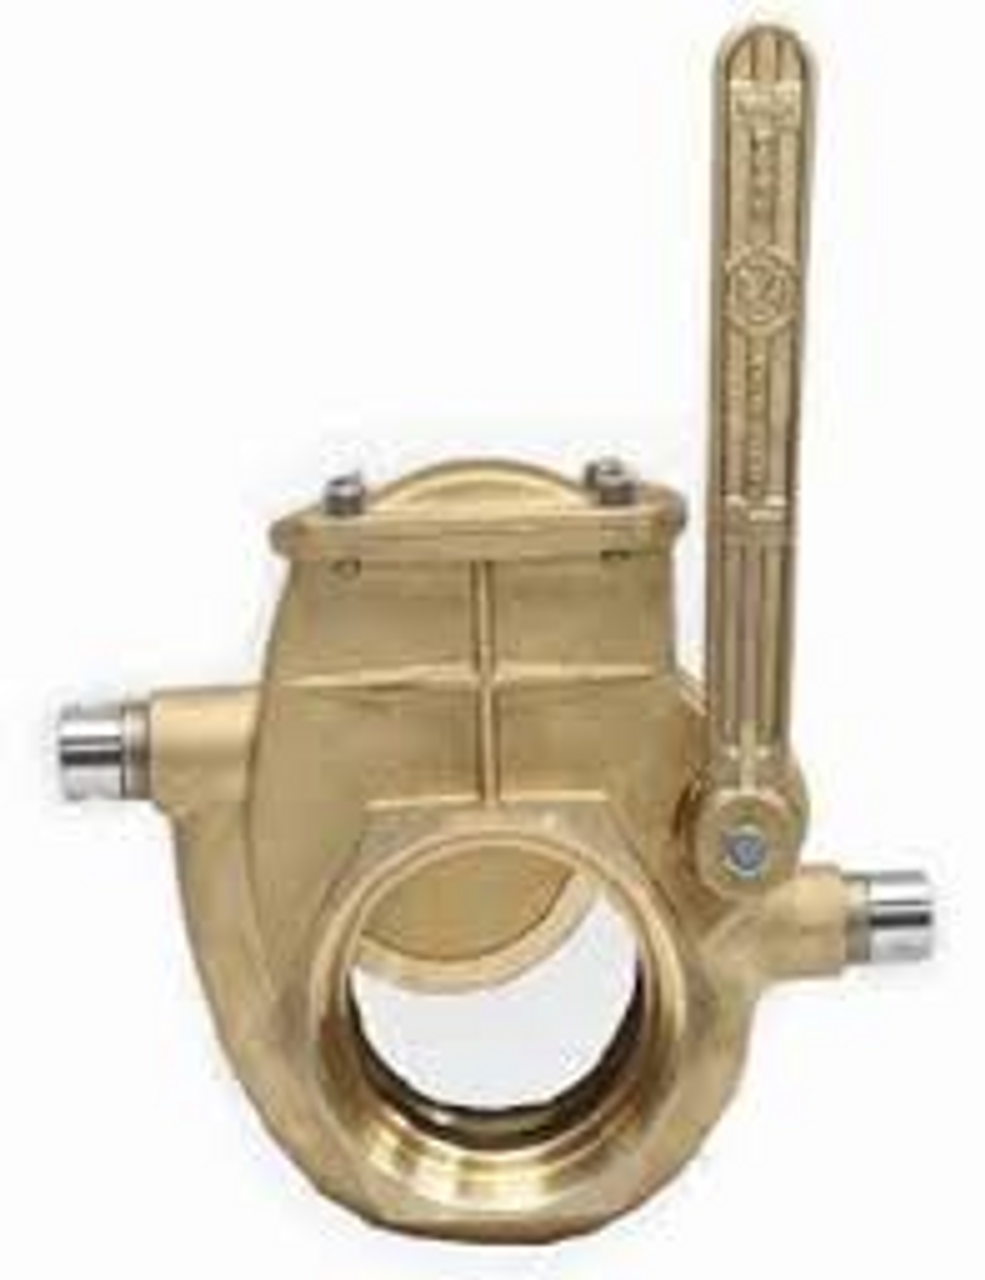   
 
  
 

  
  
 
   
 
FEATURES:
 
 
 
 22 - 45 PSI RATING
  

  
 
 STAINLESS STEEL HEATING TUBE CAST WITHIN BODY
 

   
 
 DURABLE BRASS CONSTRUCTION
 
 
 
 1/2” NPT PORTS FOR COOLANT
  

  
 
 ALL PARTS - EXCEPT BODY - INTERCHANGEABLE
 

  
 
 WITH STANDARD MZ LEVER VALVES
 
 